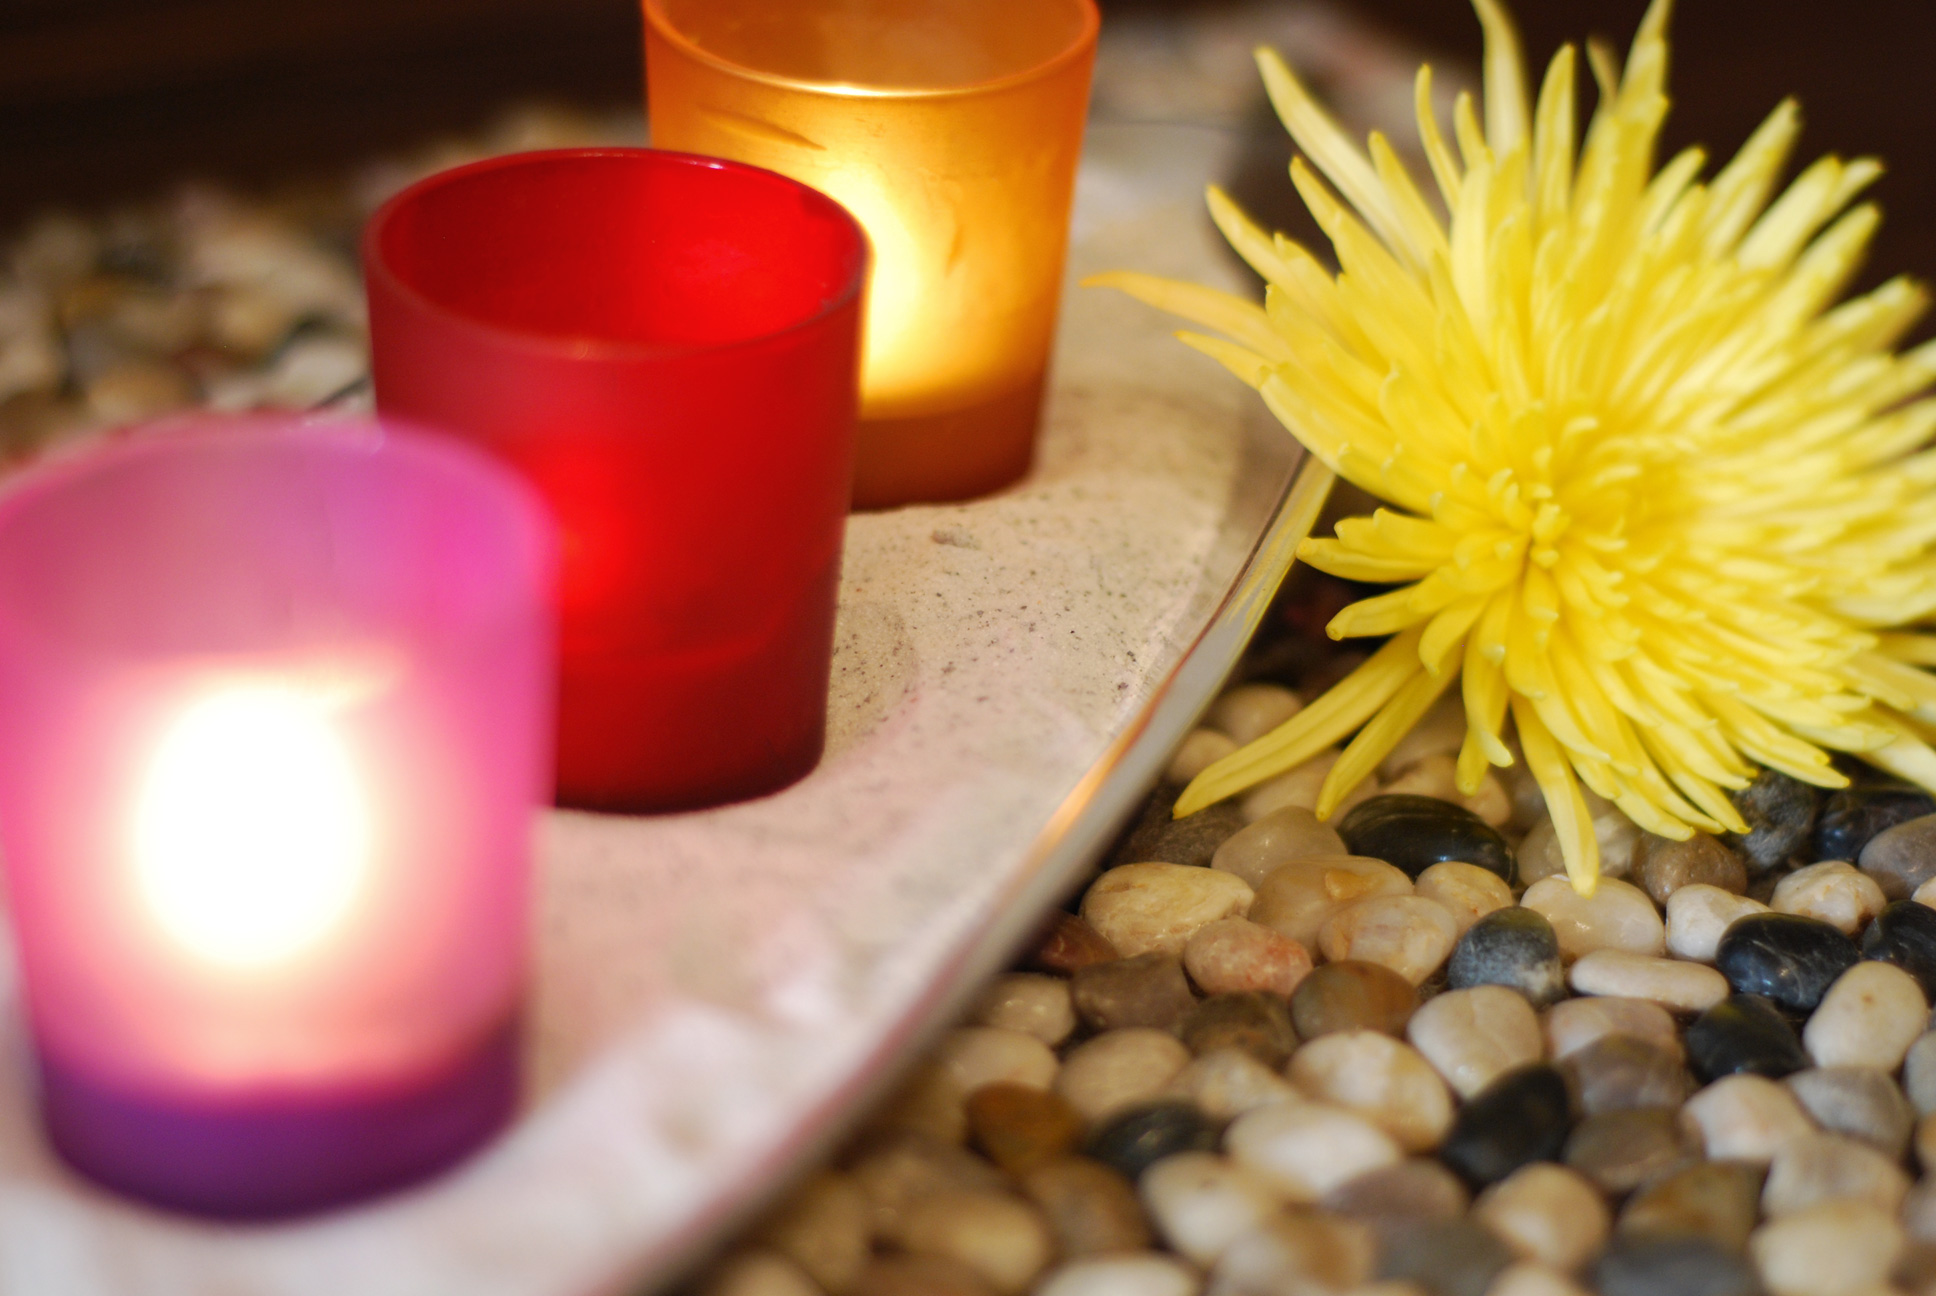 Optimize your website to help with your spa marketing.